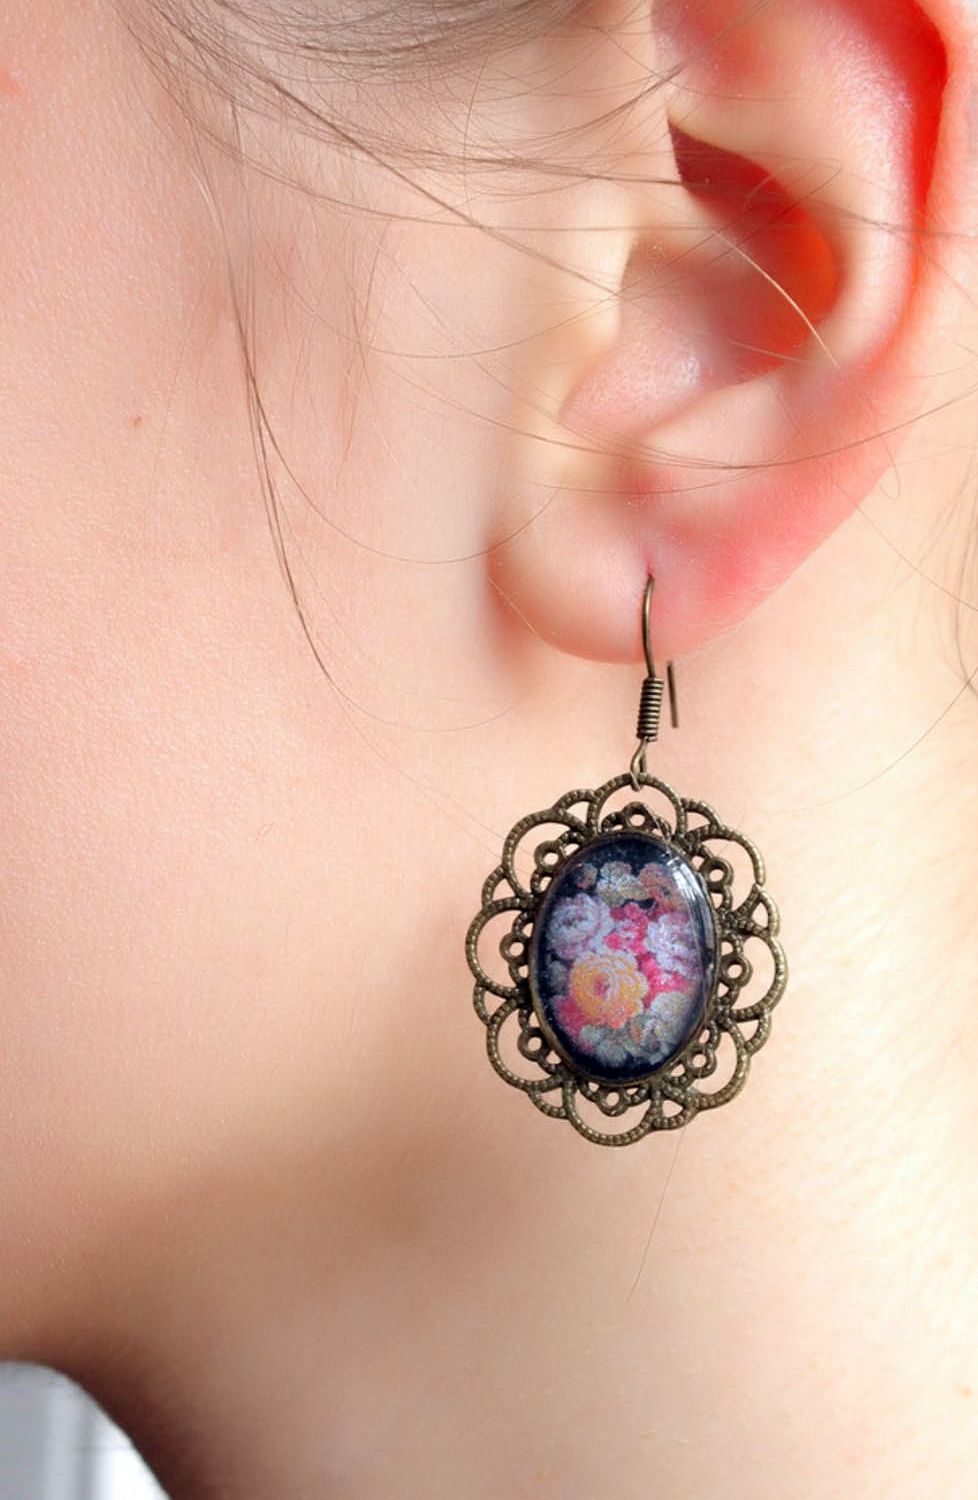 Earrings with lace trimming photo 1